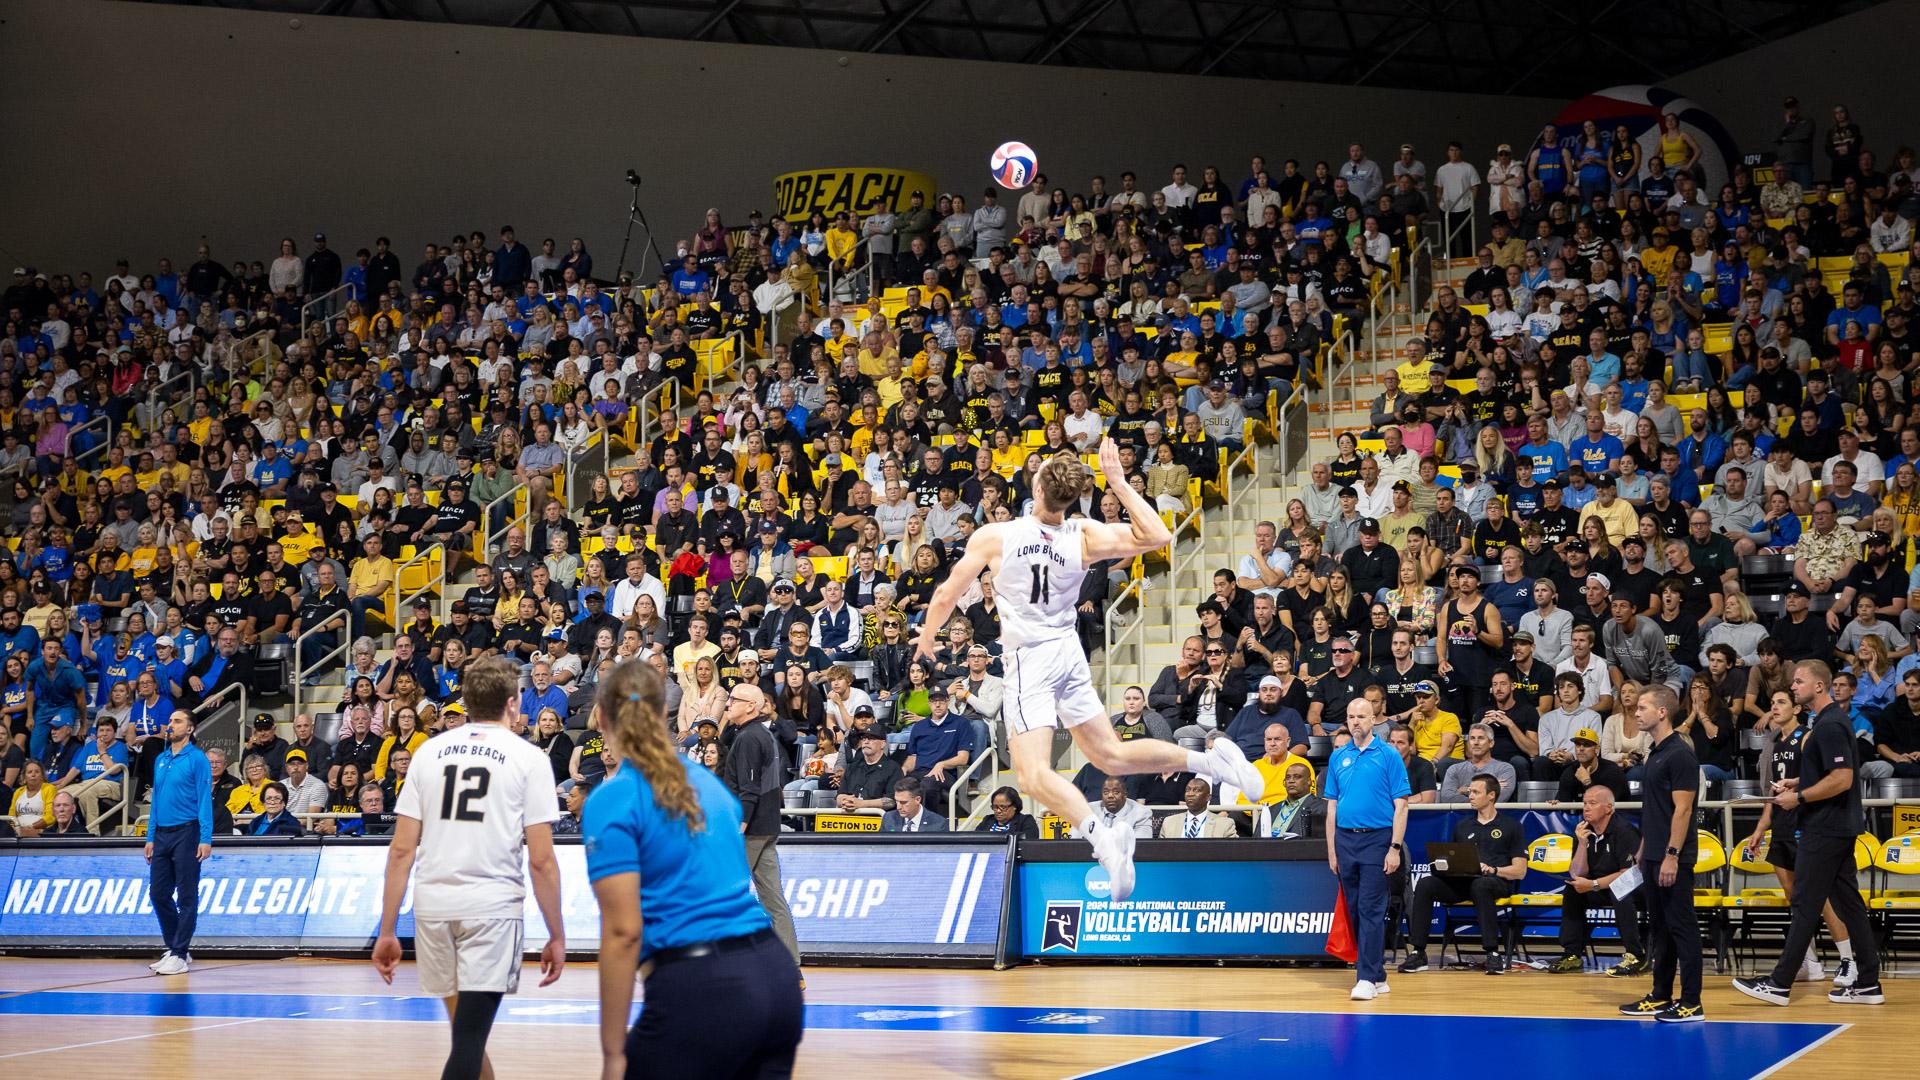 Men's volleyball final game vs UCLA